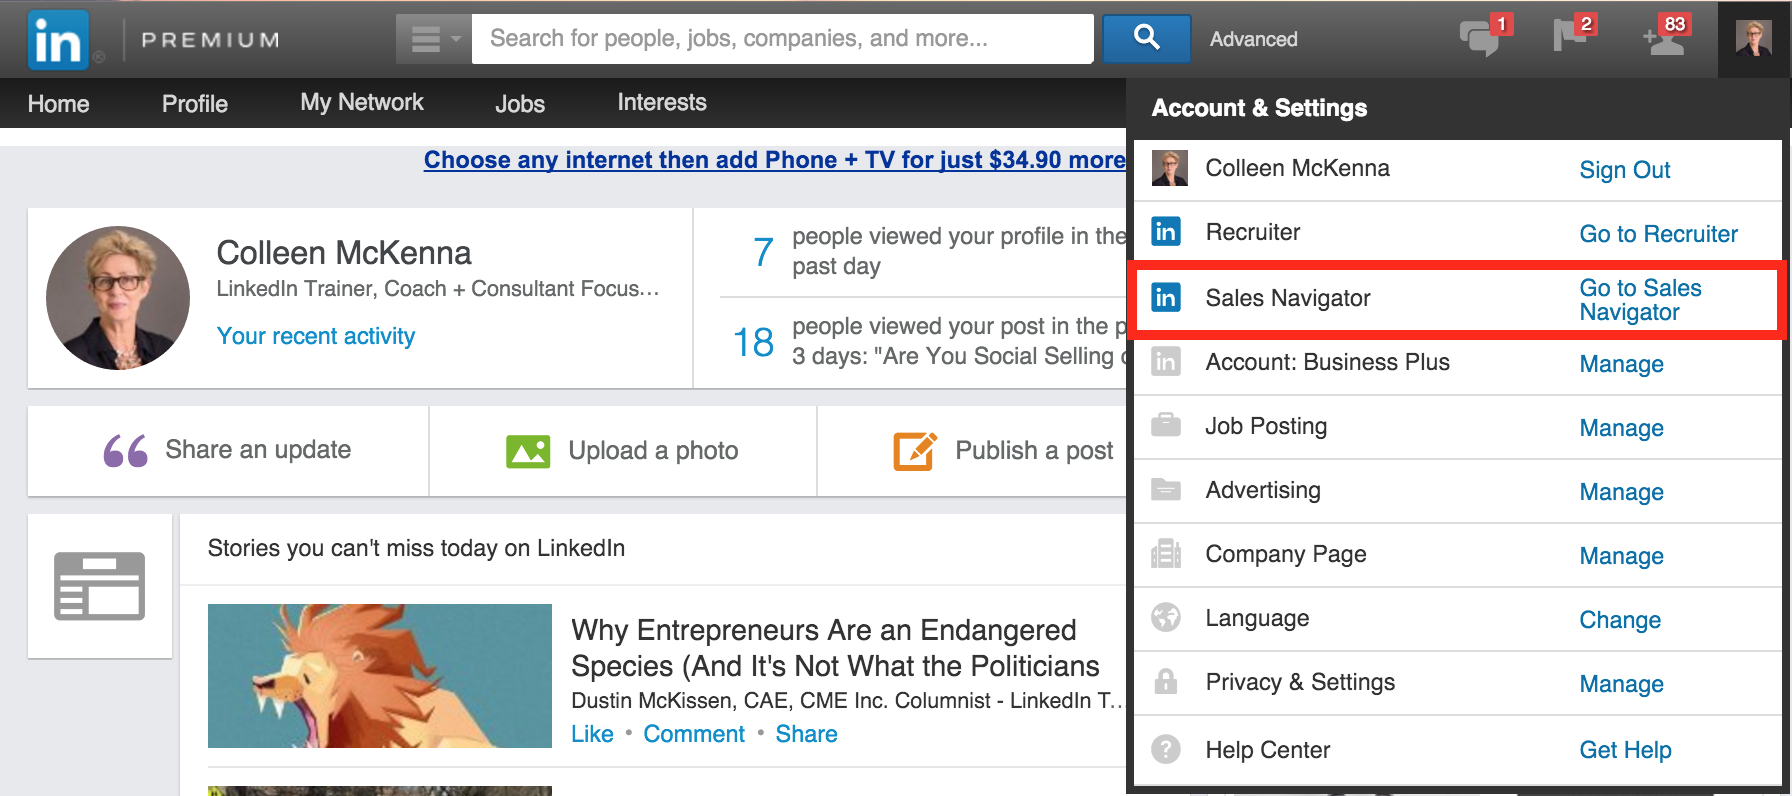 The #1 Way to Measure Your Social Selling Success